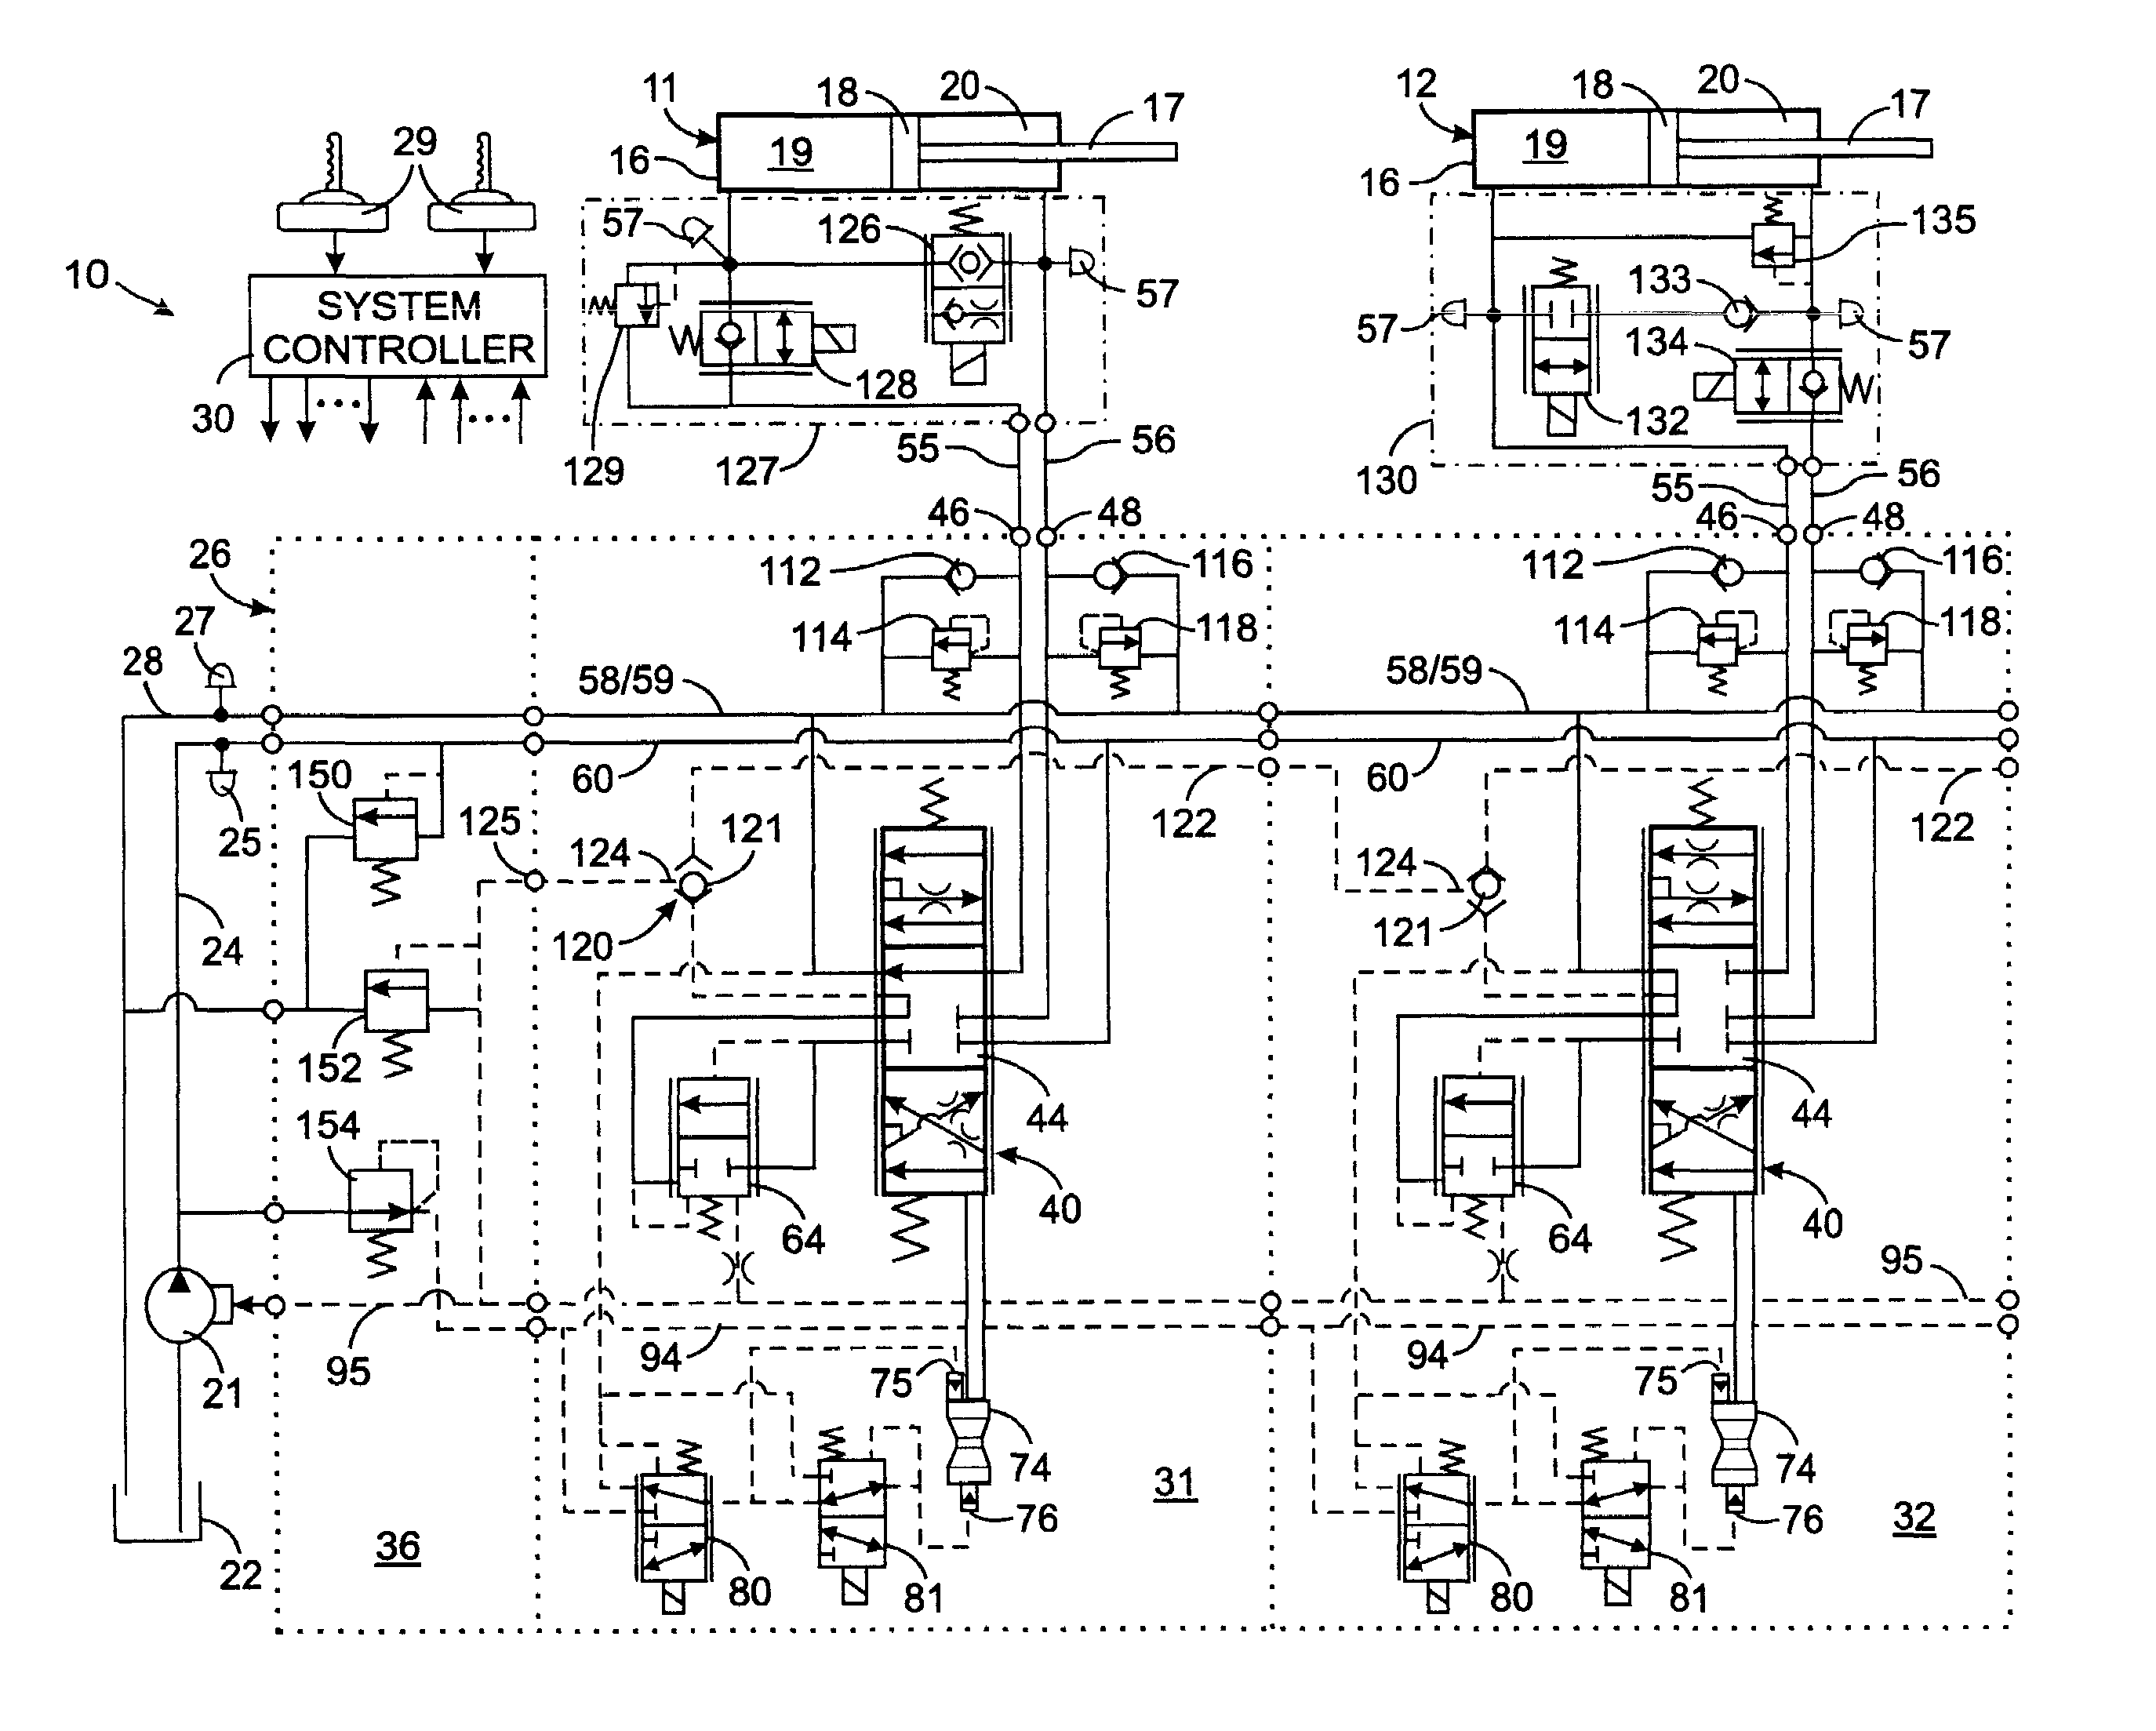 Hydraulic valve assembly with a pressure compensated directional spool valve and a regeneration shunt valve